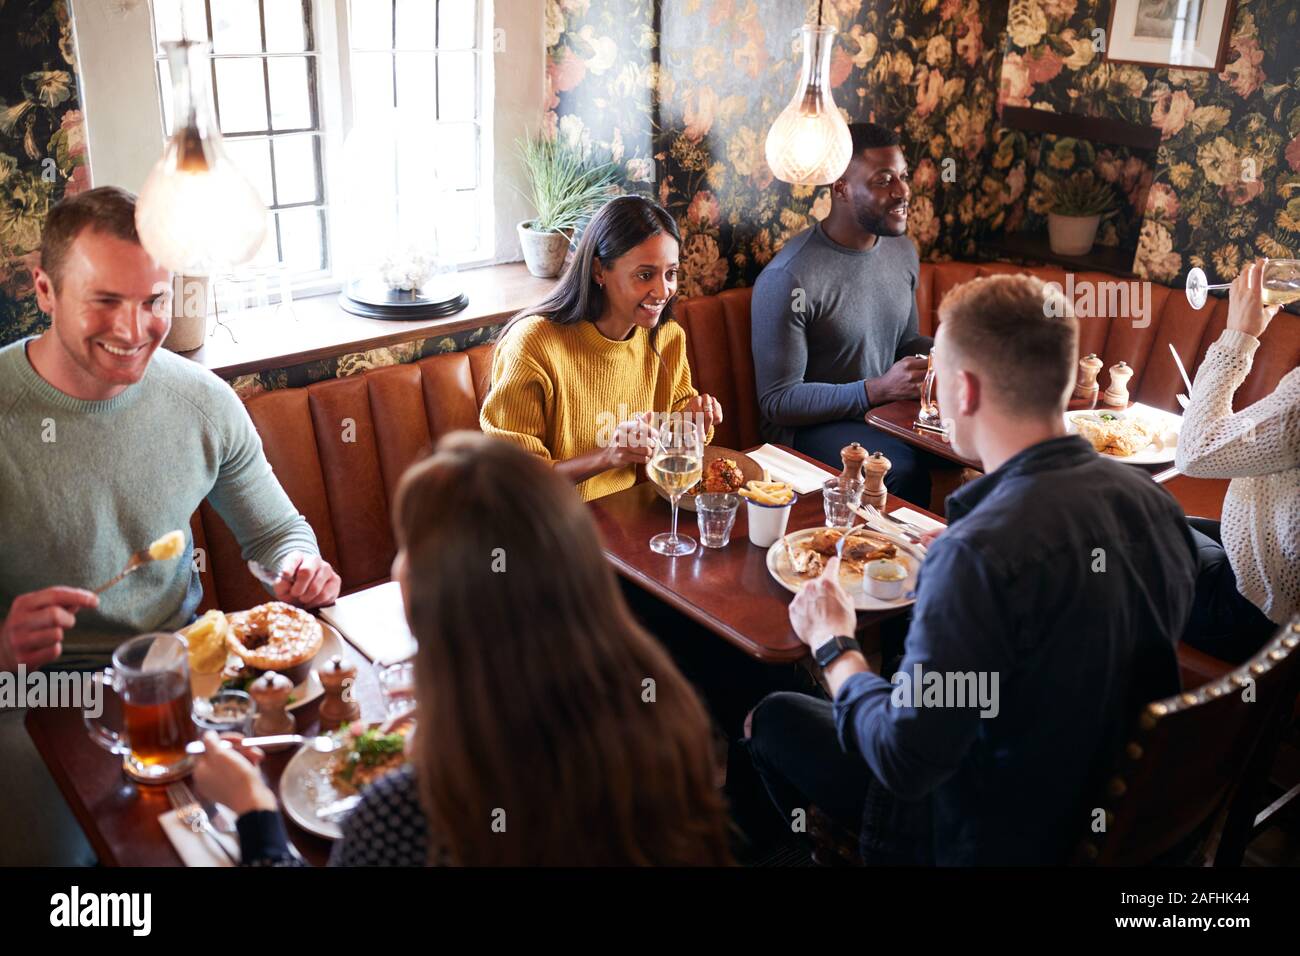 Group Of People Eating In Restaurant Of Busy Traditional English Pub Stock Photo